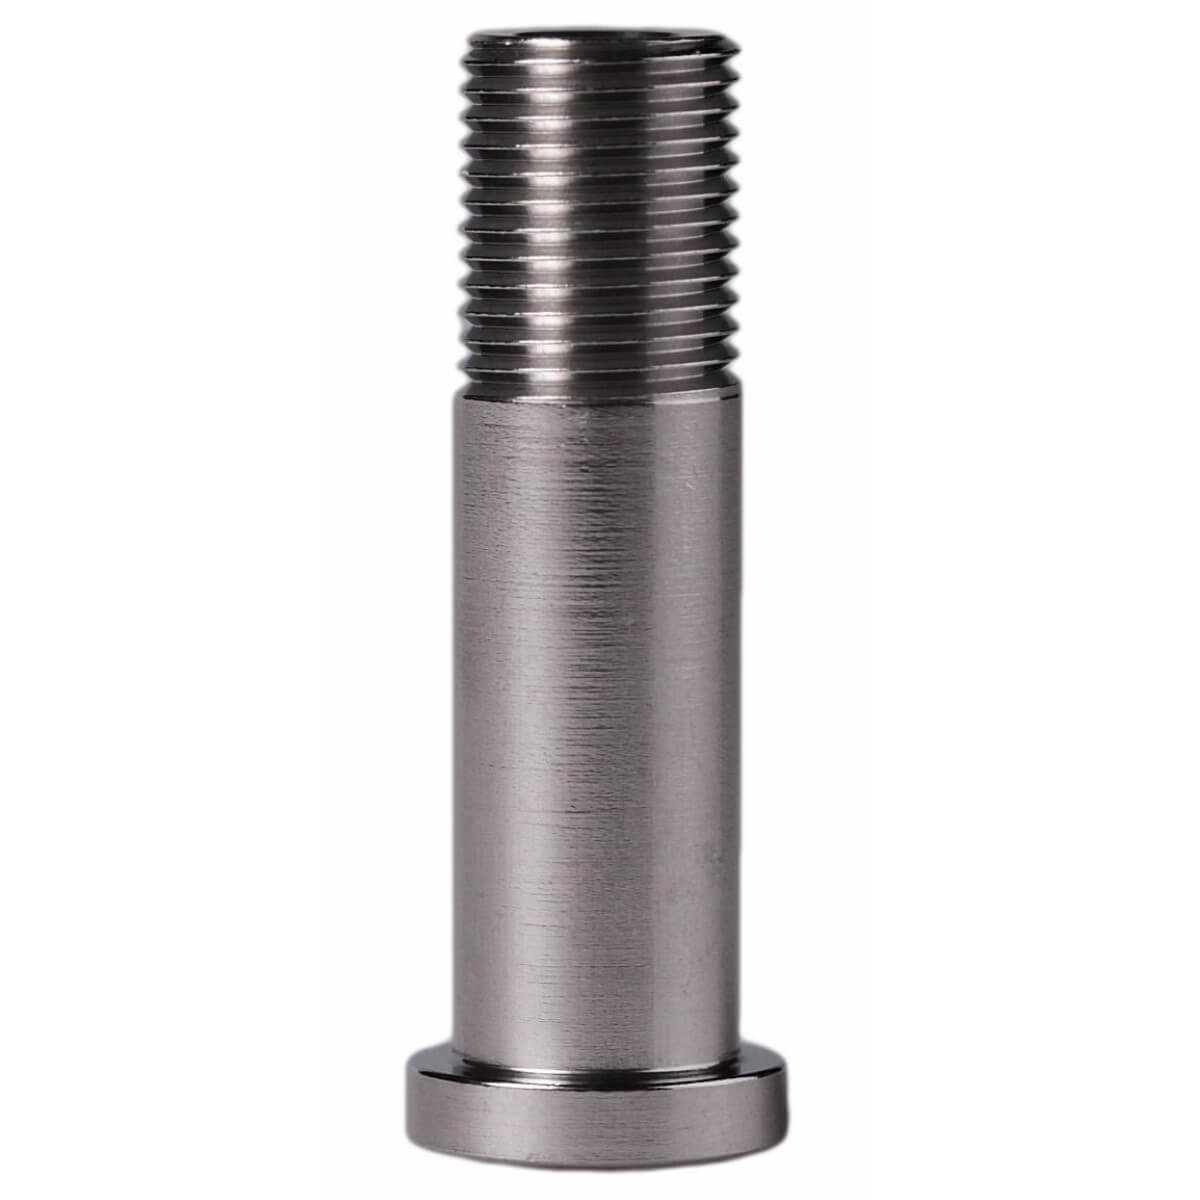 S4 stainless steel bolt M8x0.75 for D220, GH-131 - Elanus Parts